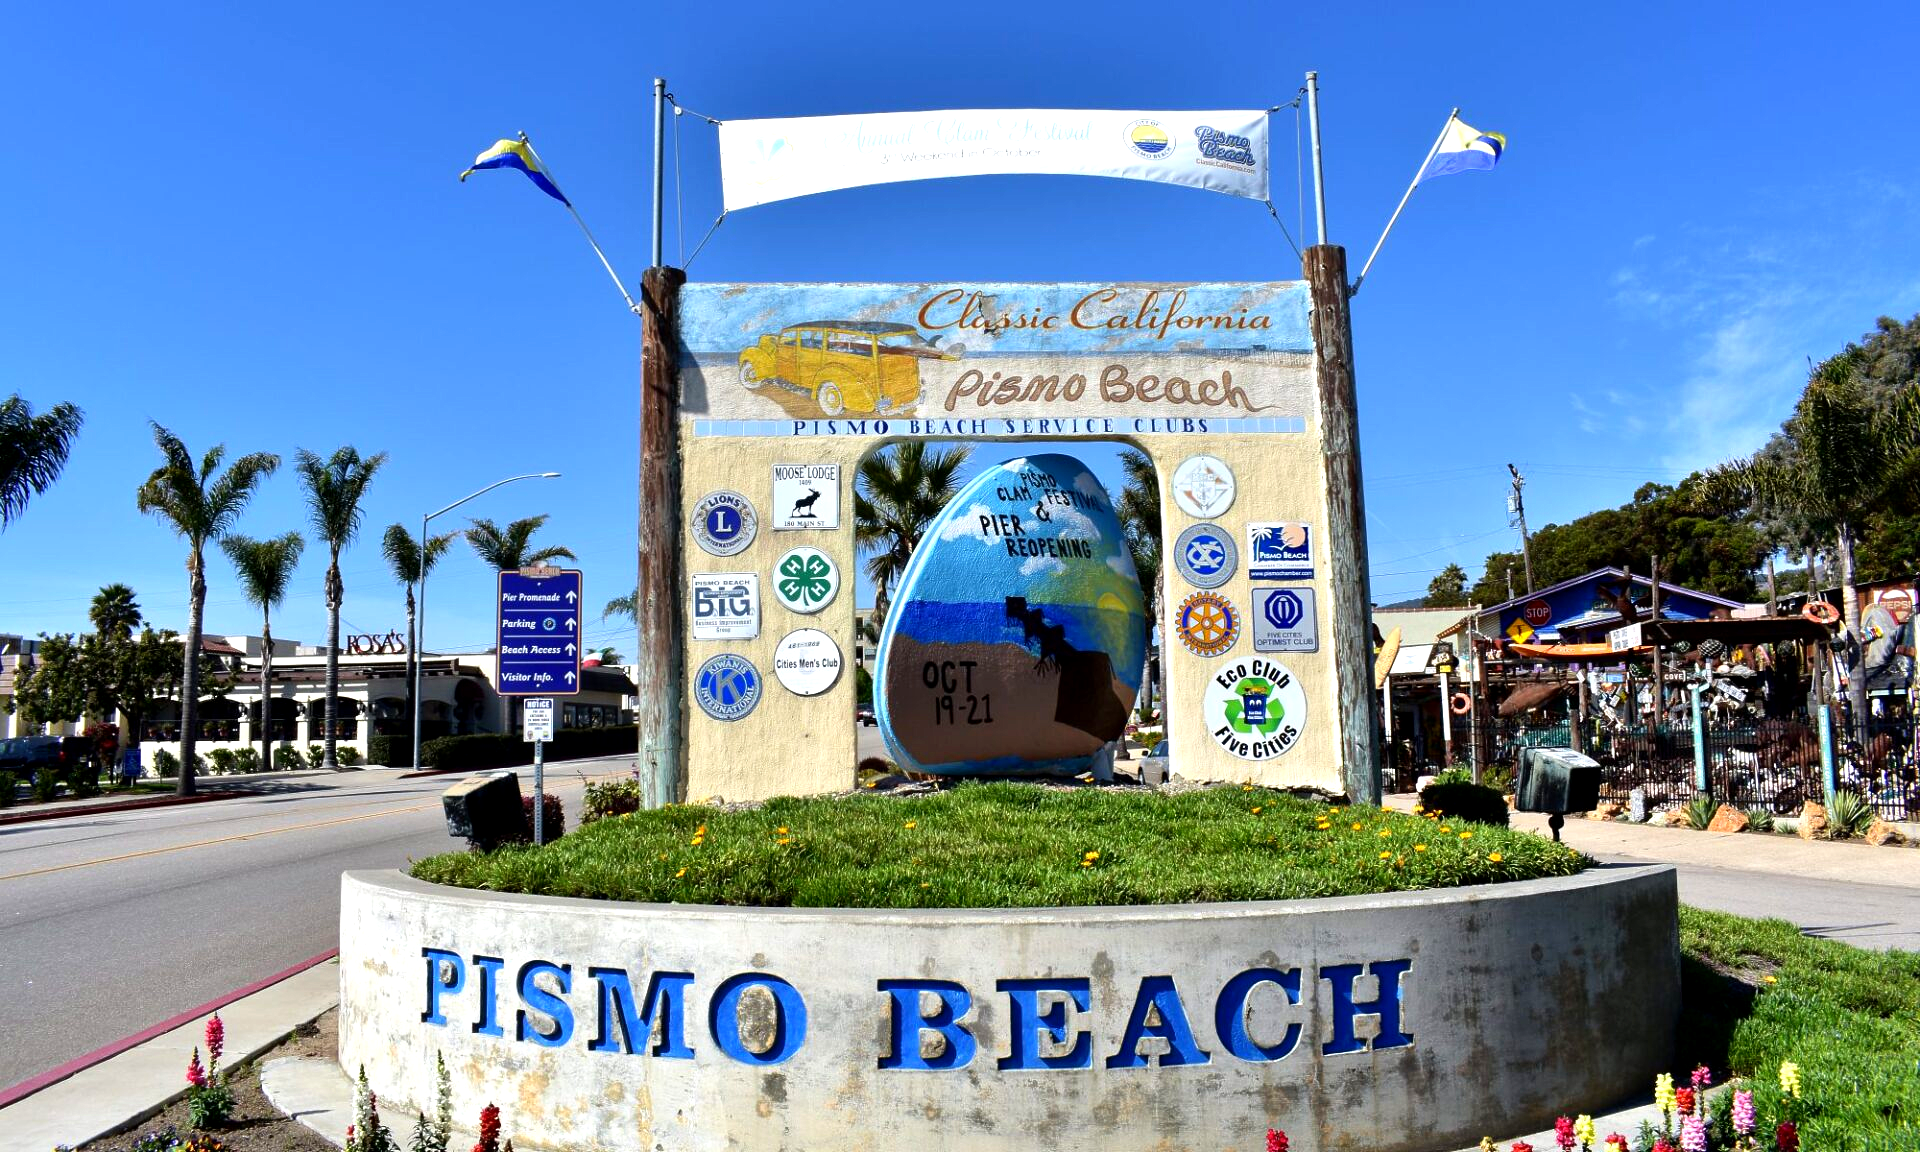 World’s Largest Clam Statues: world record set in Pismo Beach, California